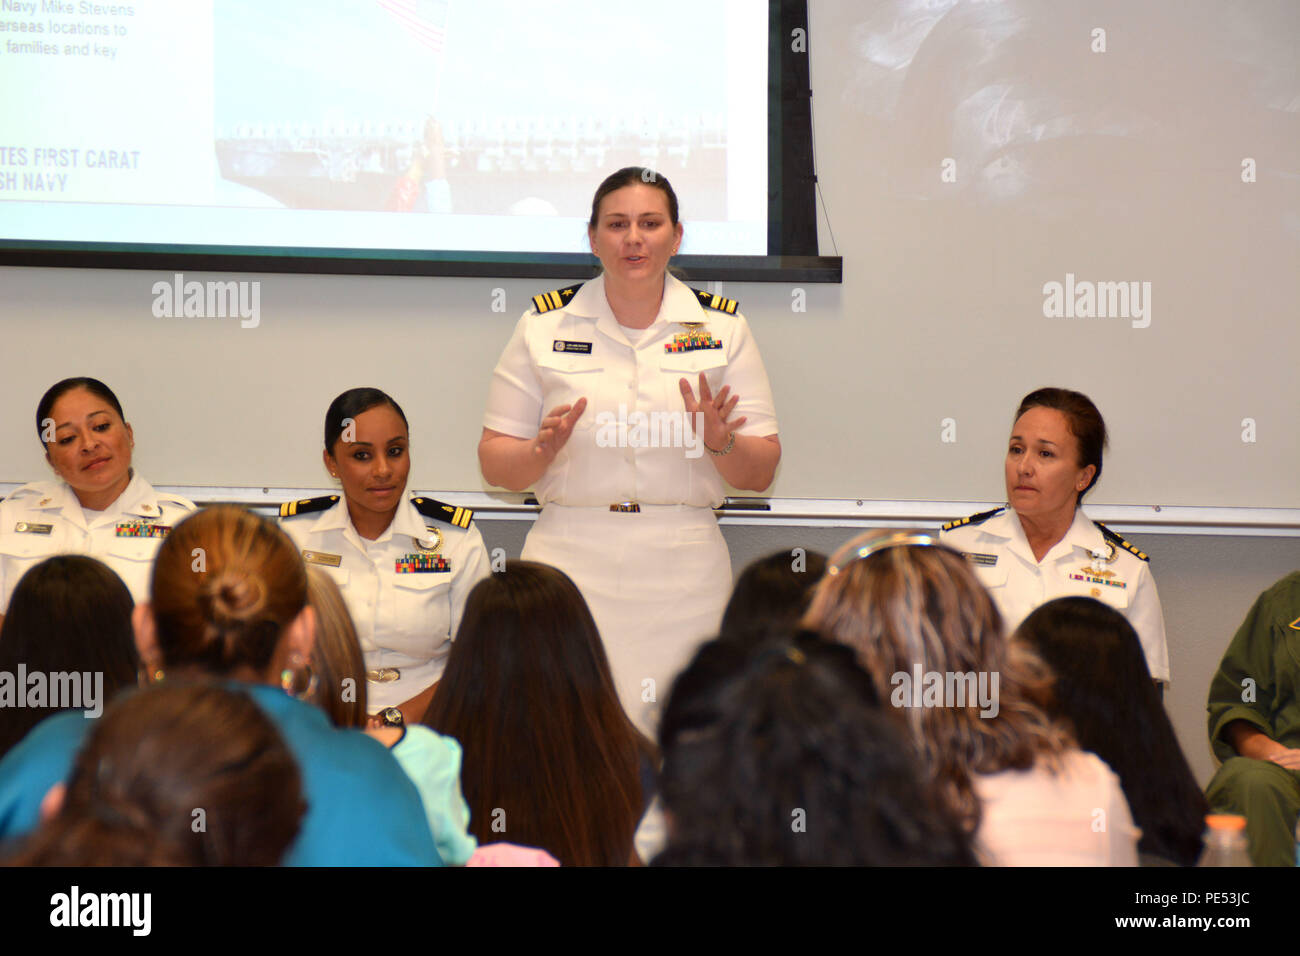 EDINBURG, Texas (Oct. 7, 2015) Chippewa Falls, Wis. native, Lt. Cmdr. Jamie Erickson, operations officer with Navy Recruiting District San Antonio, speaks to young Latinas and their mothers about life in the U.S. Navy during Latina Day held at the 2015 Hispanic Engineering, Science and Technology (HESTEC) Week on the campus of the University of Texas-Rio Grande Valley.  Latina Day provided Latino officer and enlisted Sailors the direct opportunity to provide young Latinas and their mothers with grassroots perspectives on opportunities, benefits, and careers in the Navy.  The Sailors served as  Stock Photo